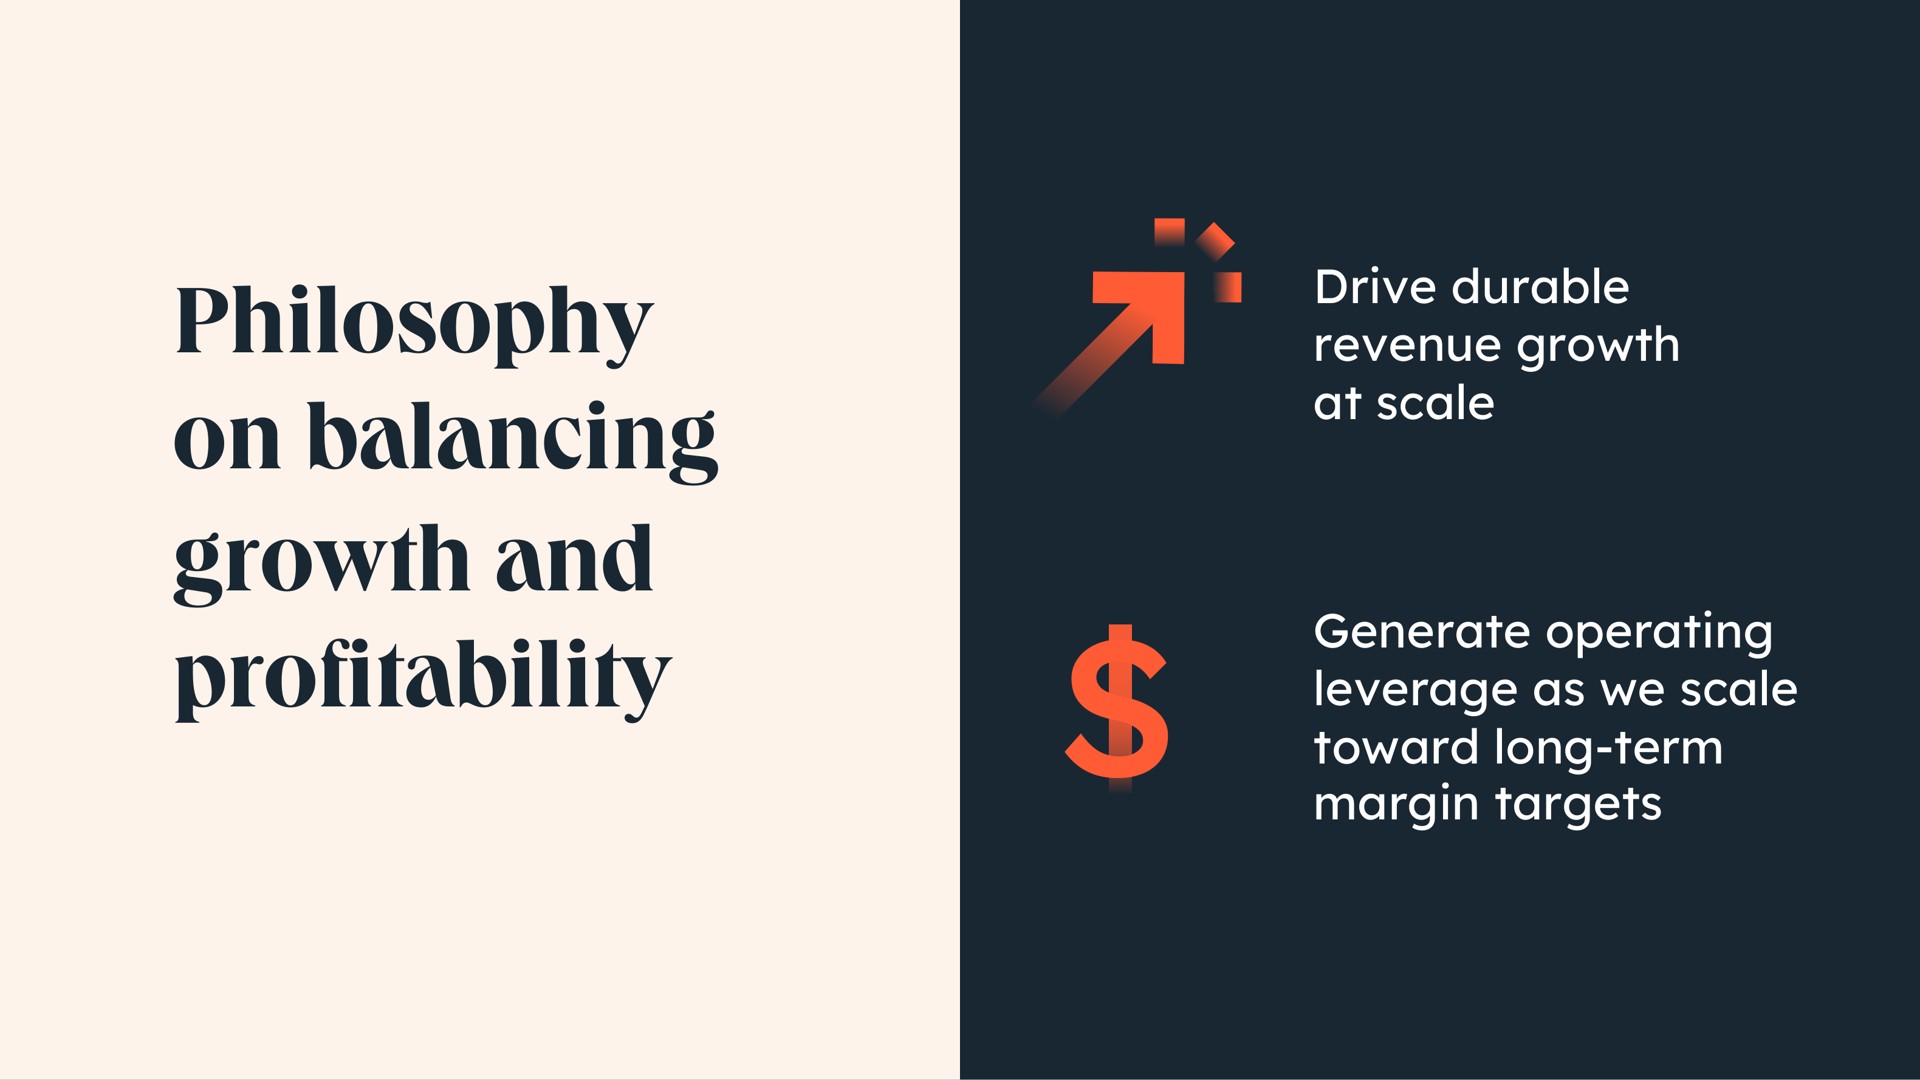 philosophy on balancing growth and profitability revenue generate operating leverage as we scale margin targets | Hubspot